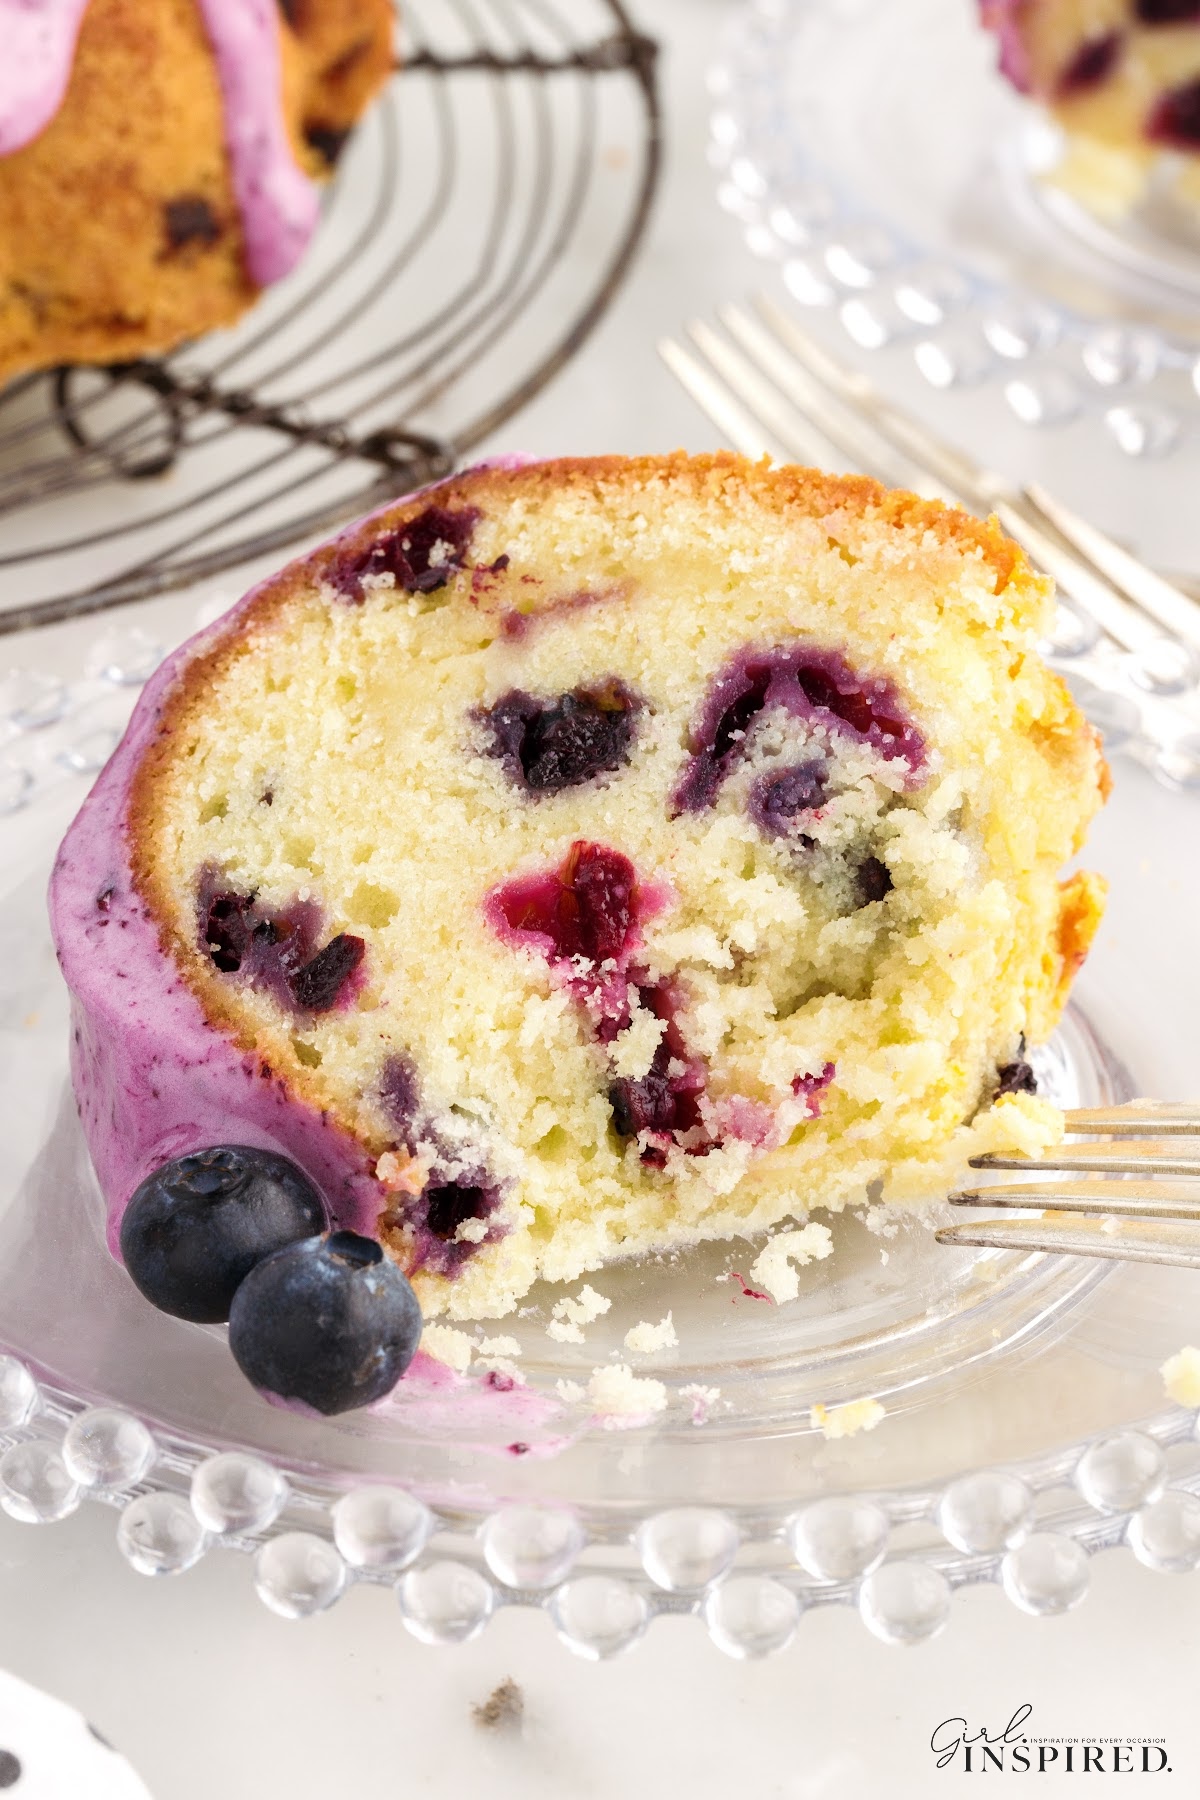 A slice of Blueberry Pound Cake on a small dish.